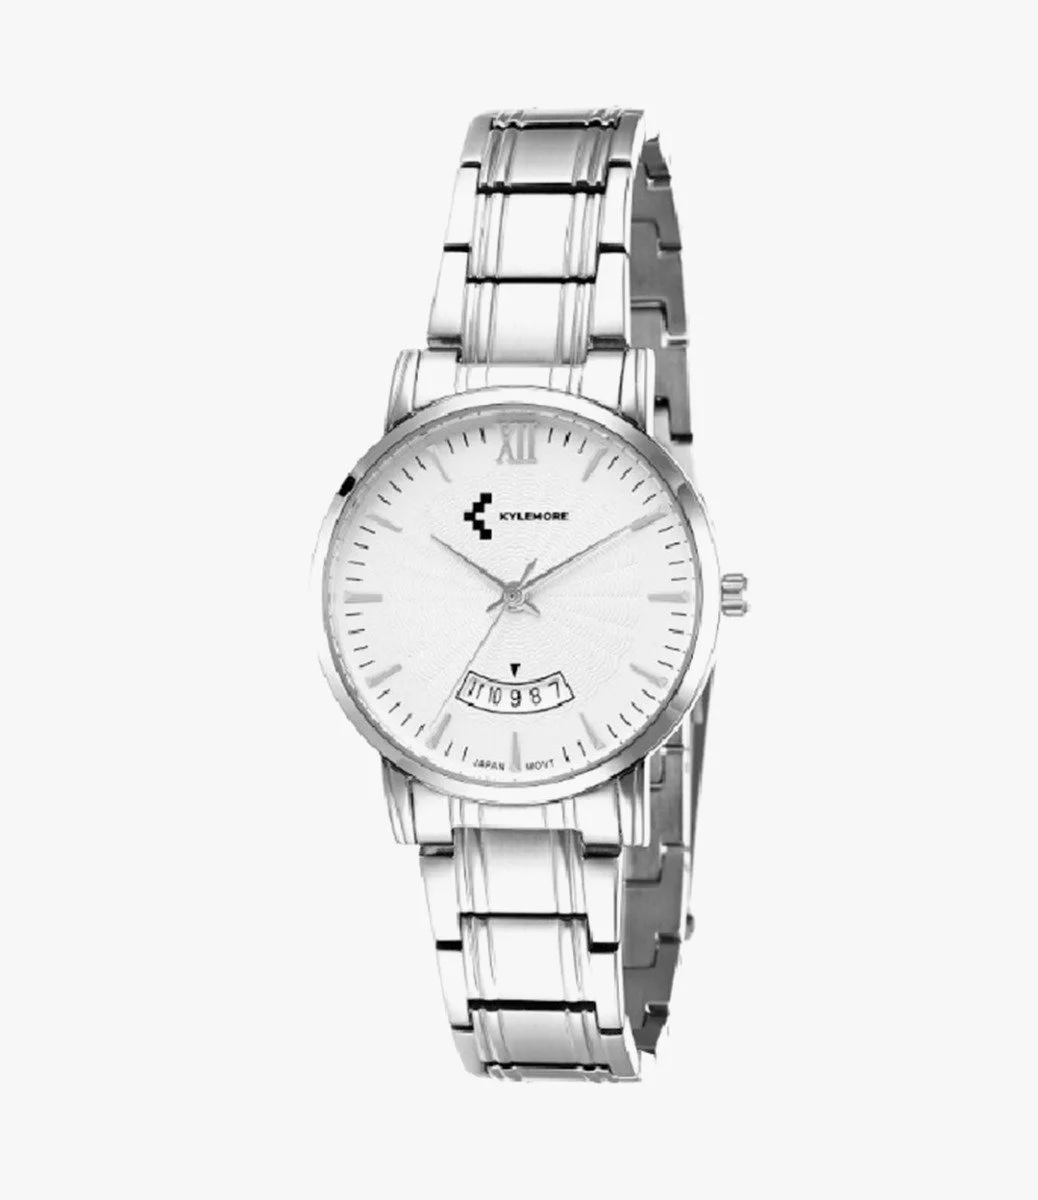 The Silver Kylemore Watch for Women